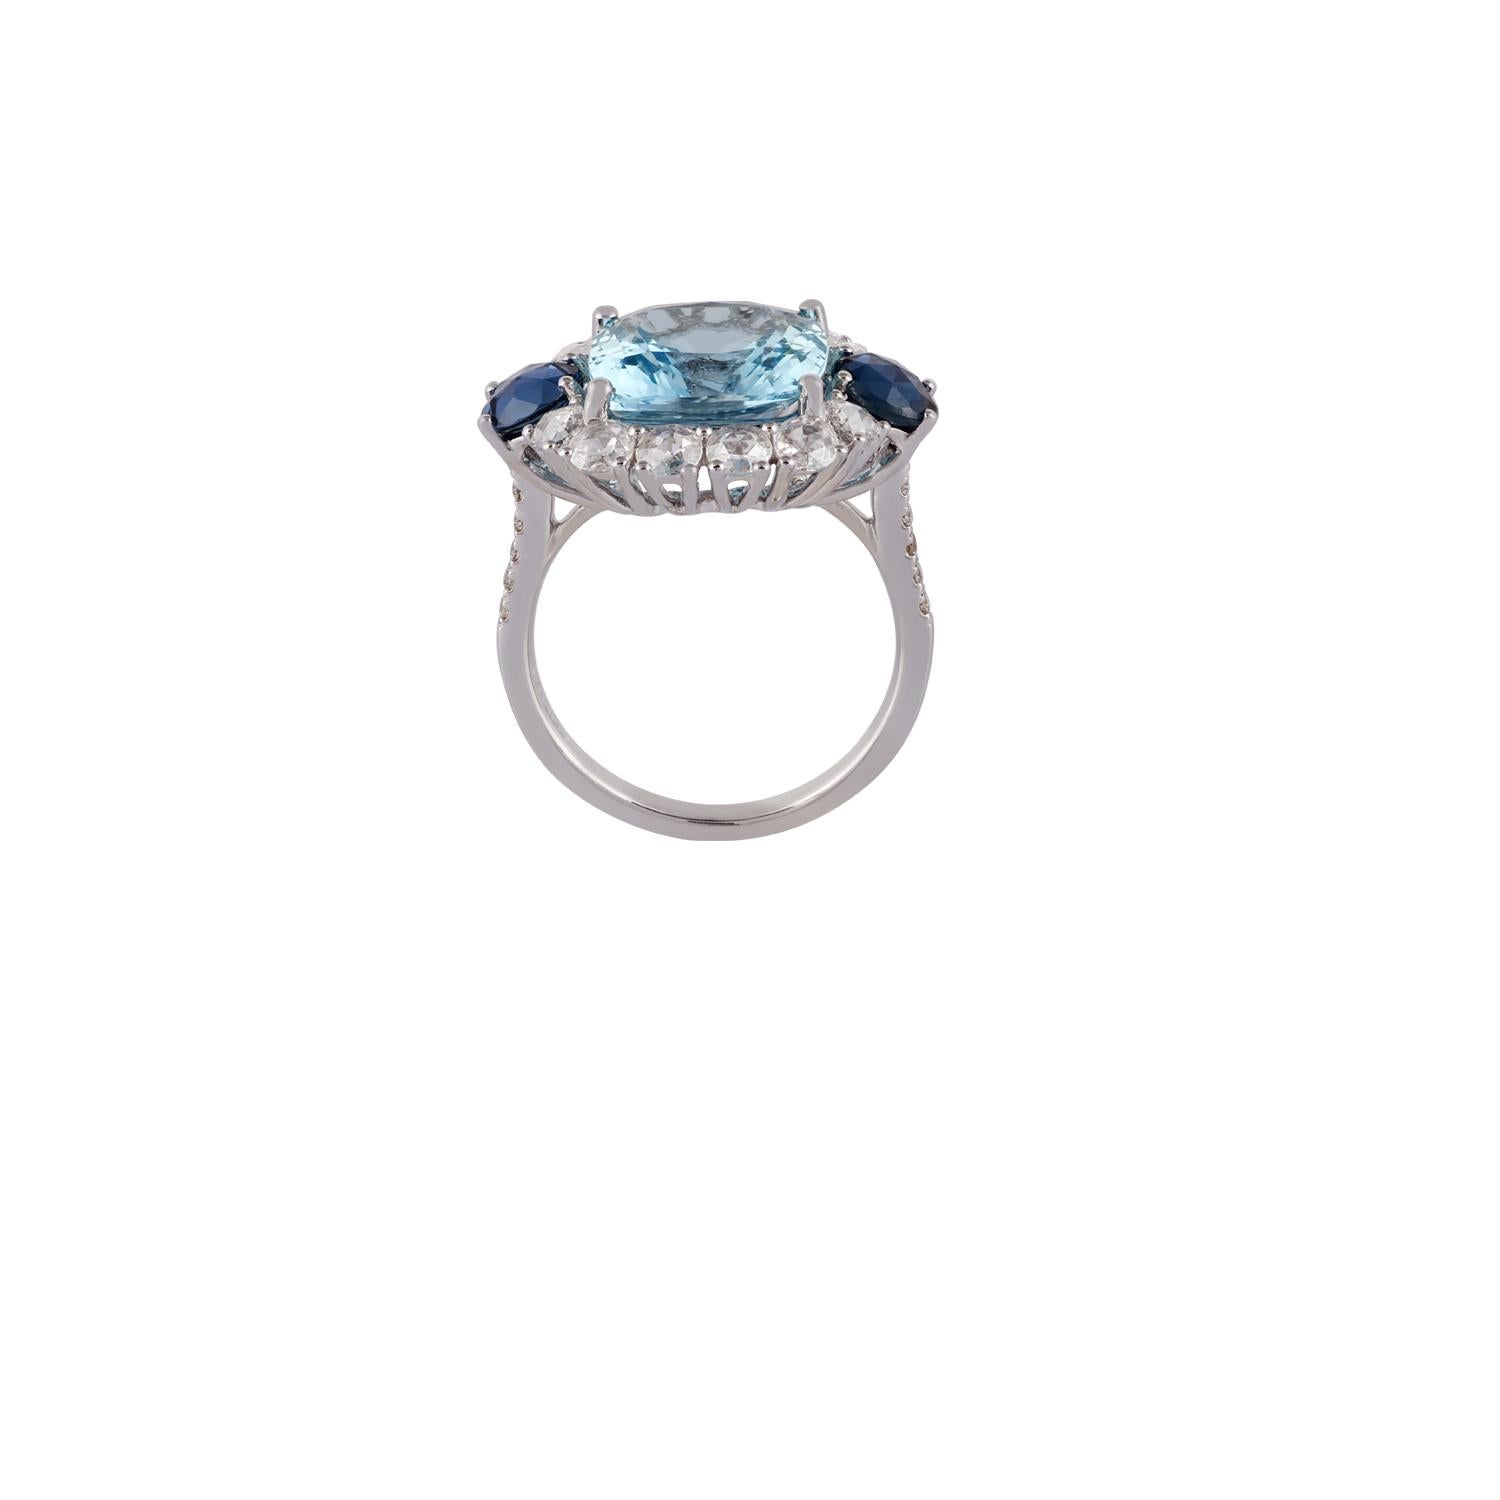 Contemporary 4.42 Carat Aquamarine, Blue Sapphire & Diamond Ring Studded in 18k White Gold For Sale